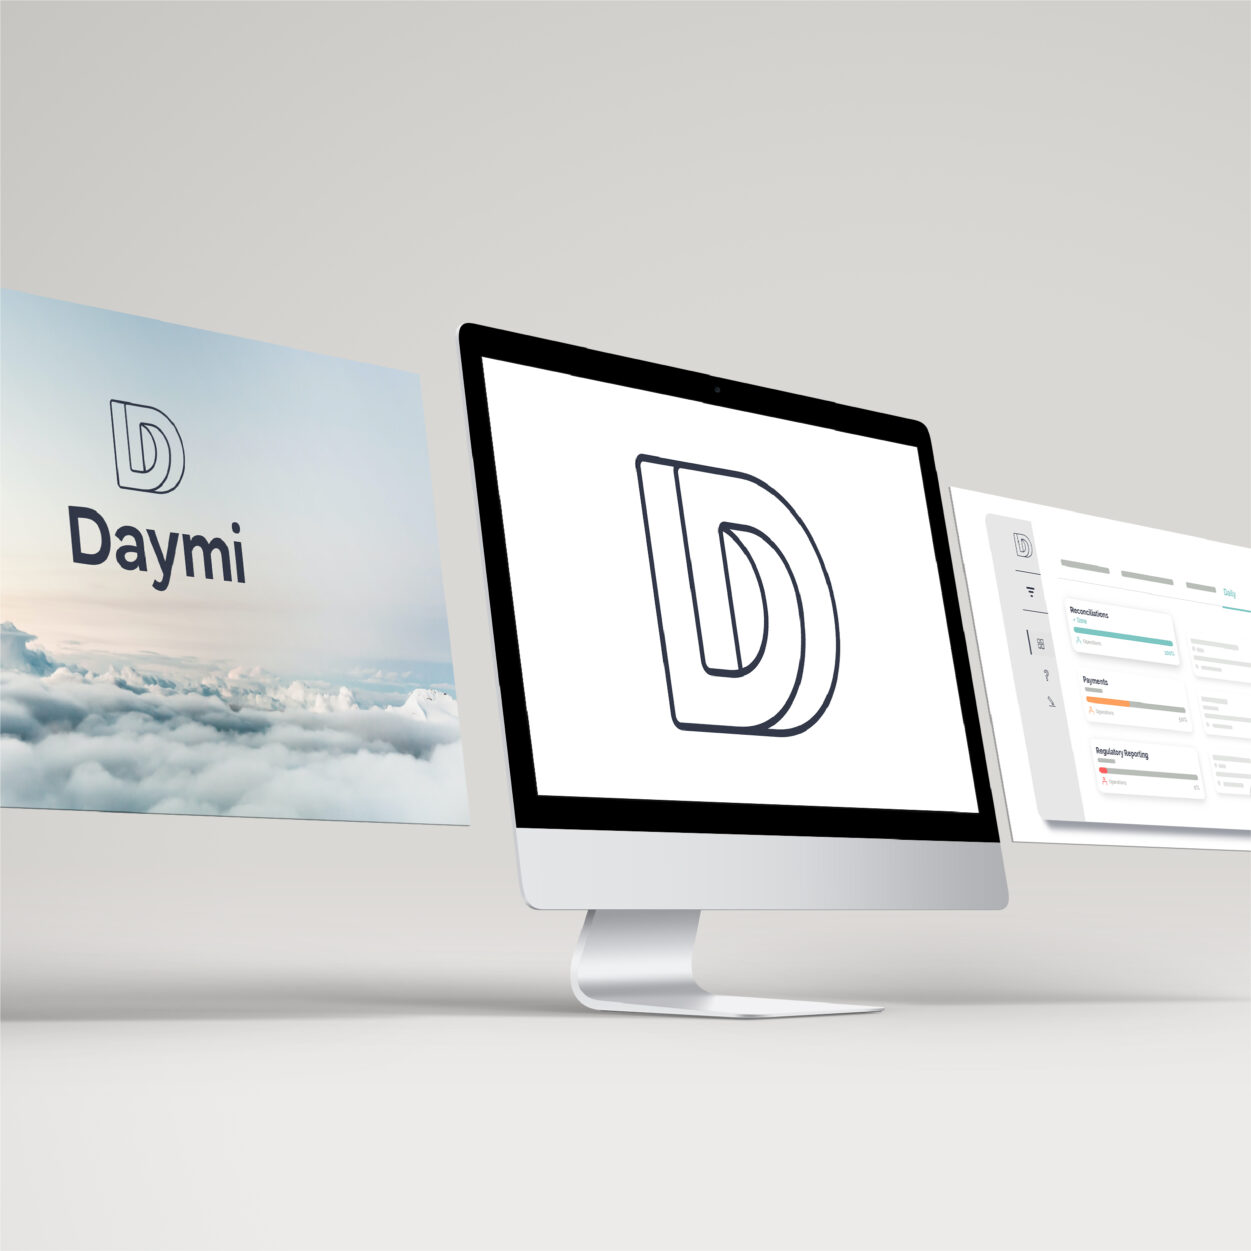 Daymi for Operational efficiency